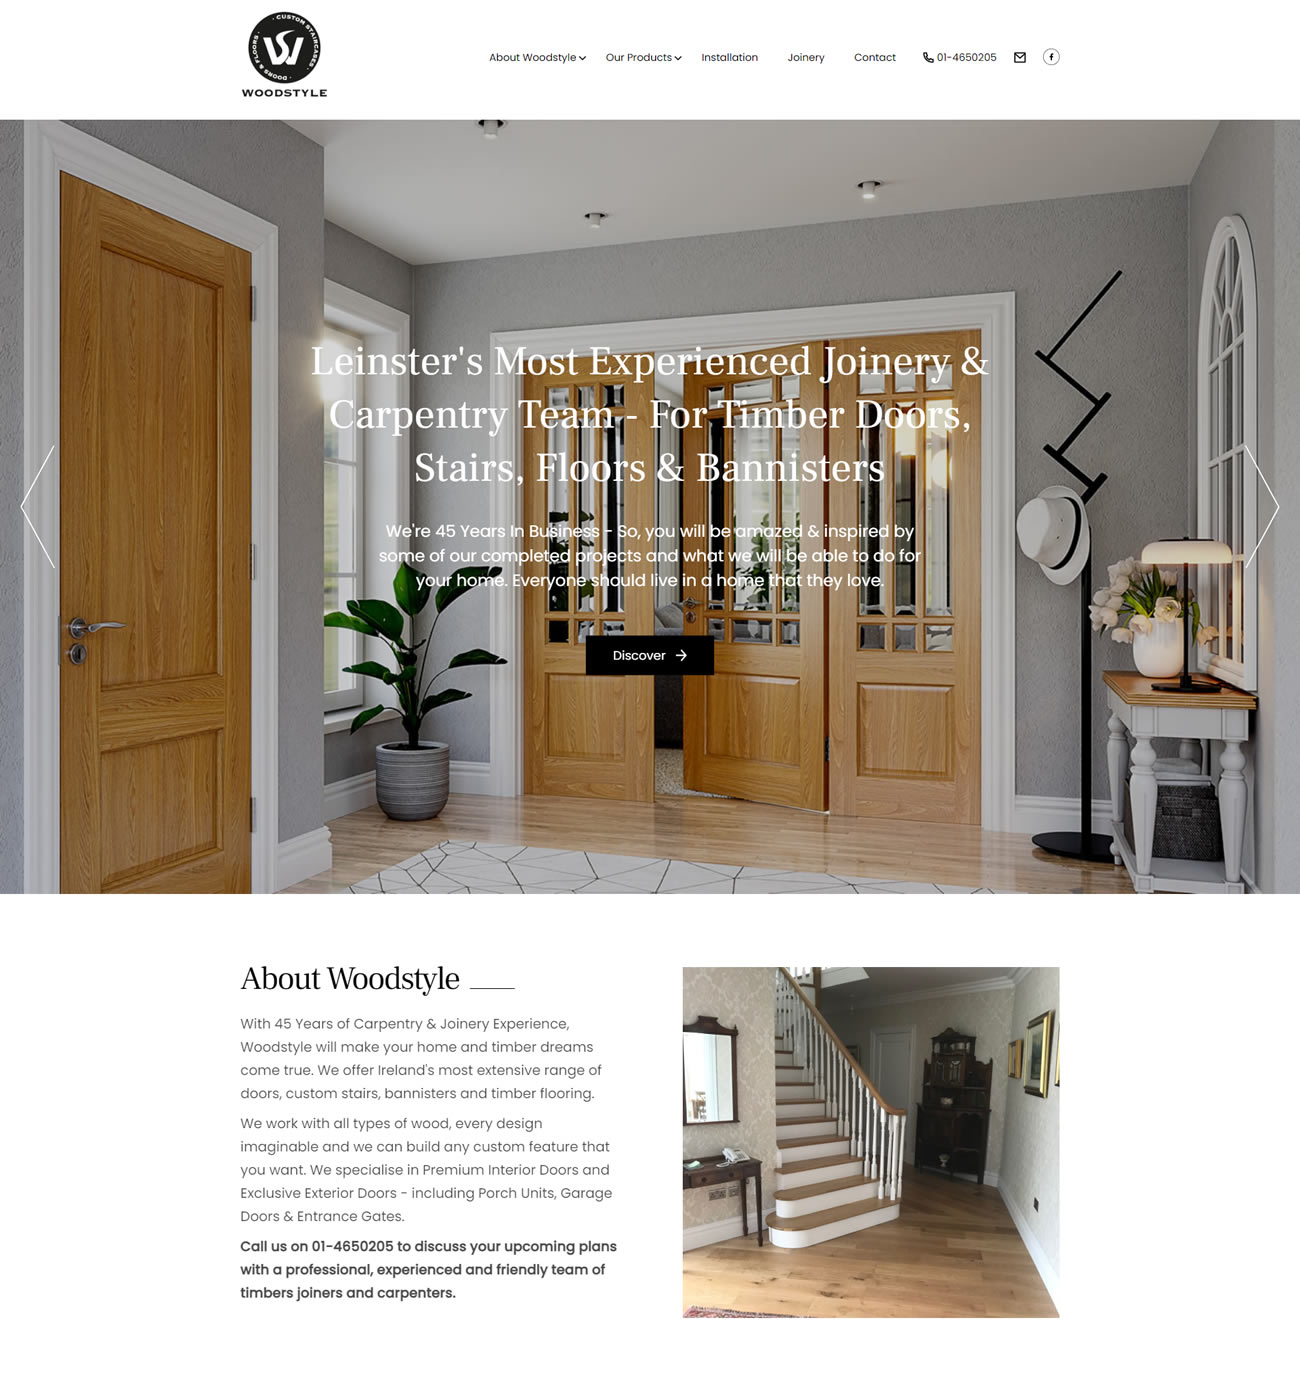 Woodstyle Stairs, Doors & Carpentry - new website design and website management & hosting